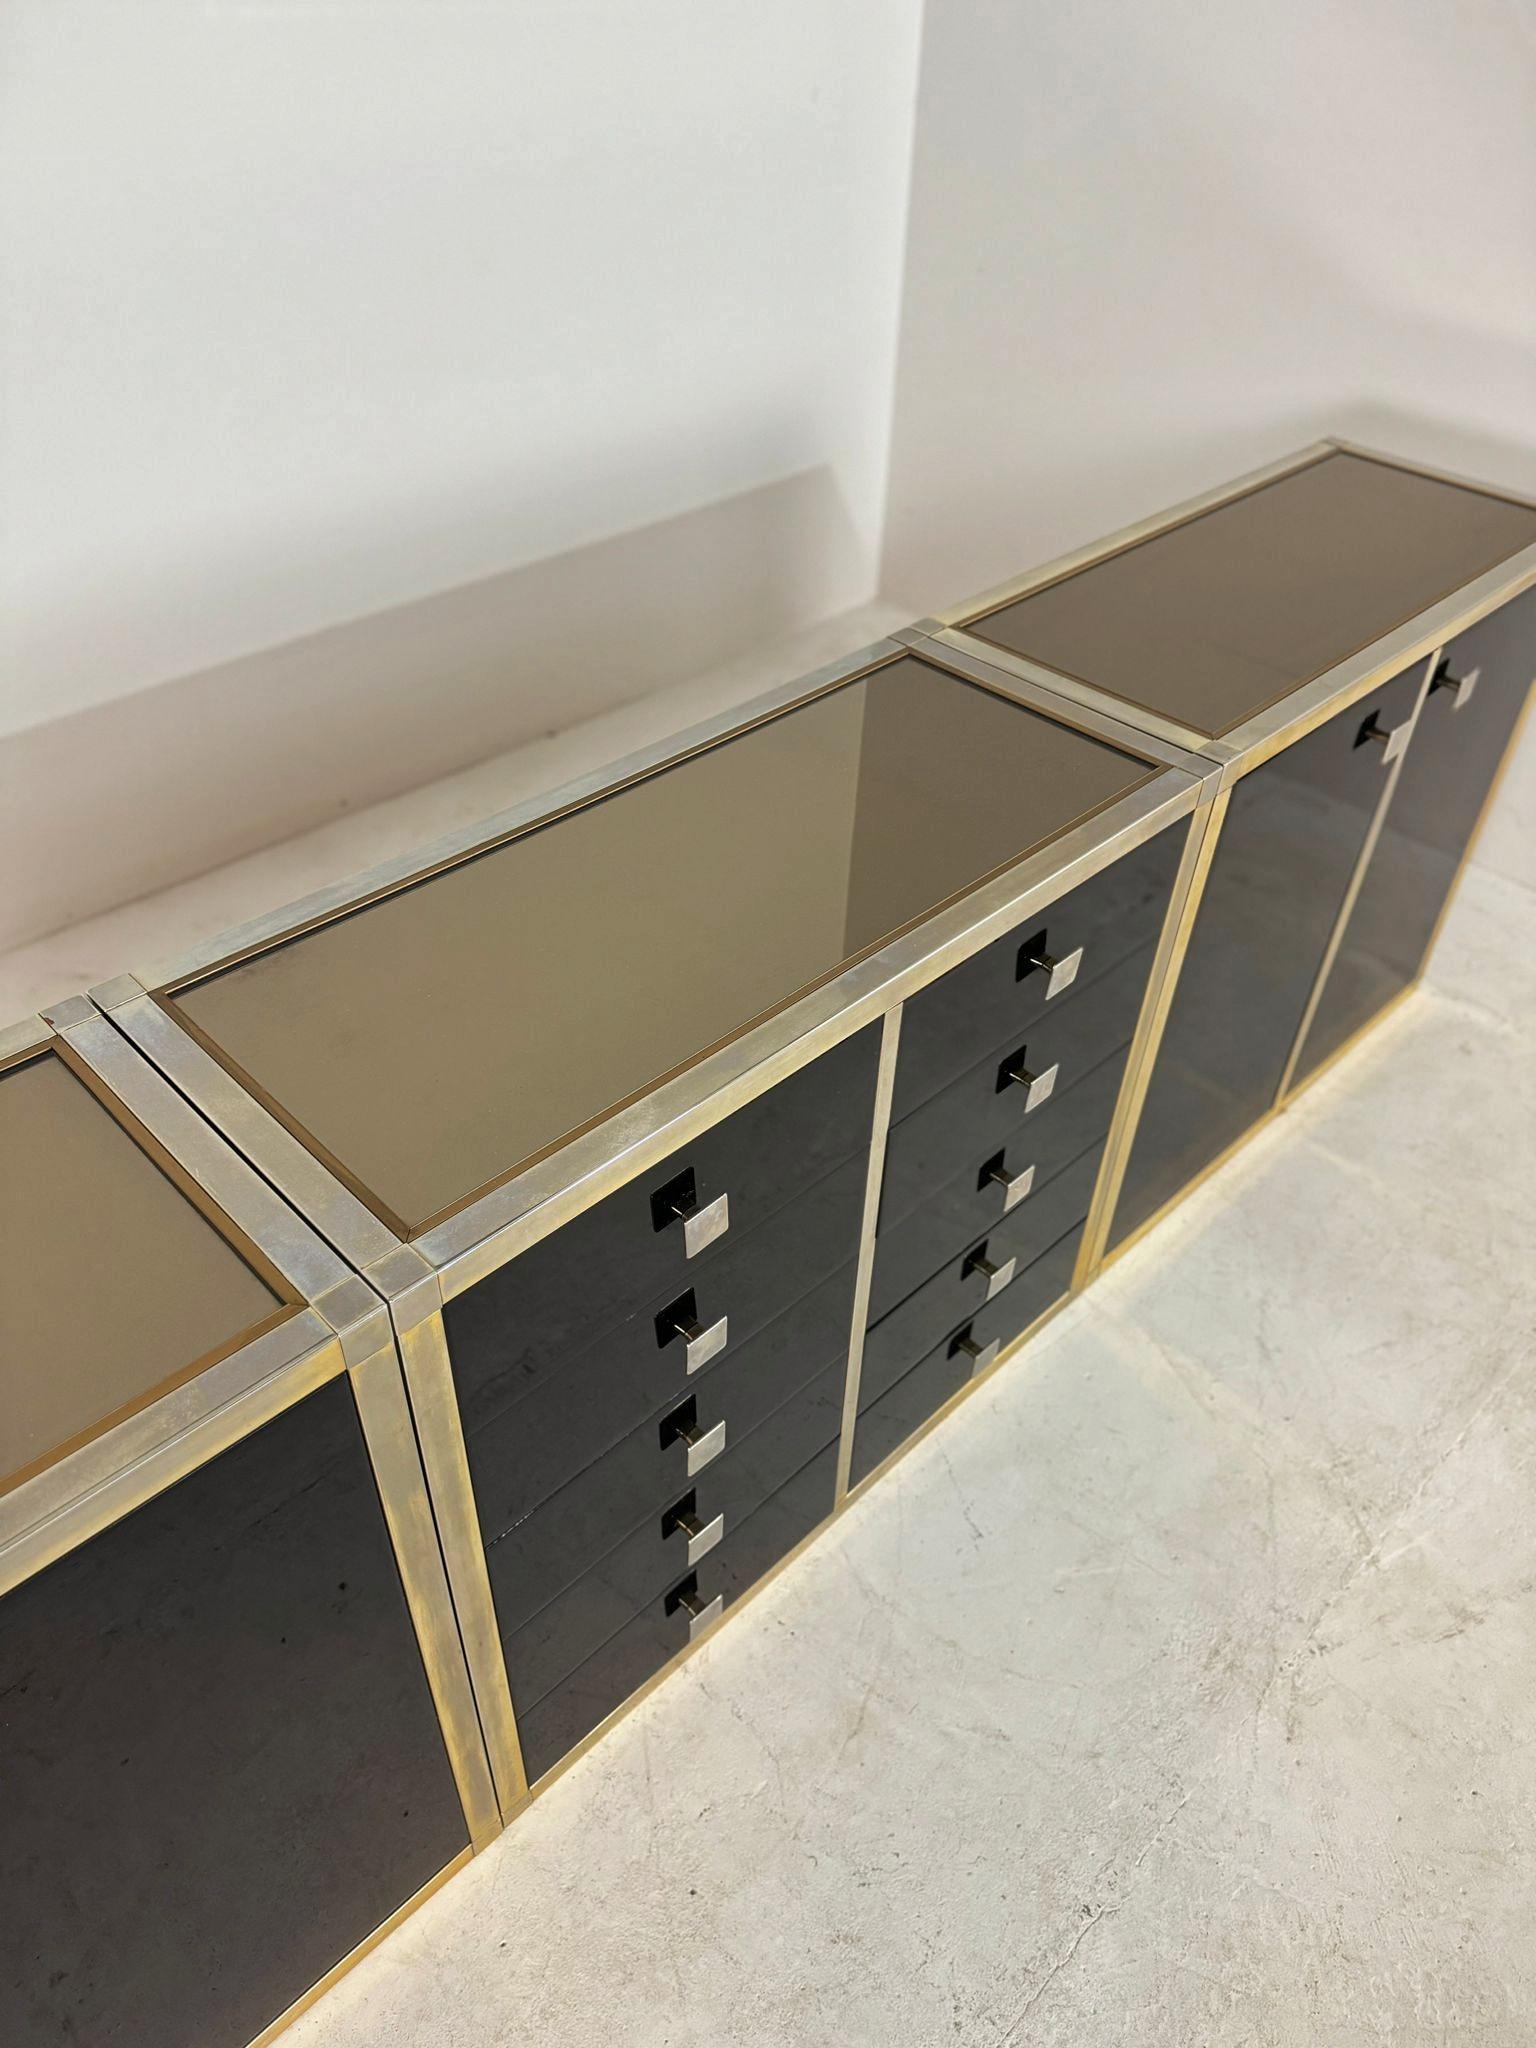 Stunning sideboard in very good condition.

Designed by Renato Zevi in the 1970s, Italy.

The sideboard consists of three pieces which also can be used separately.

Each element has a brass framing and black laminated panels and fronts and a glass